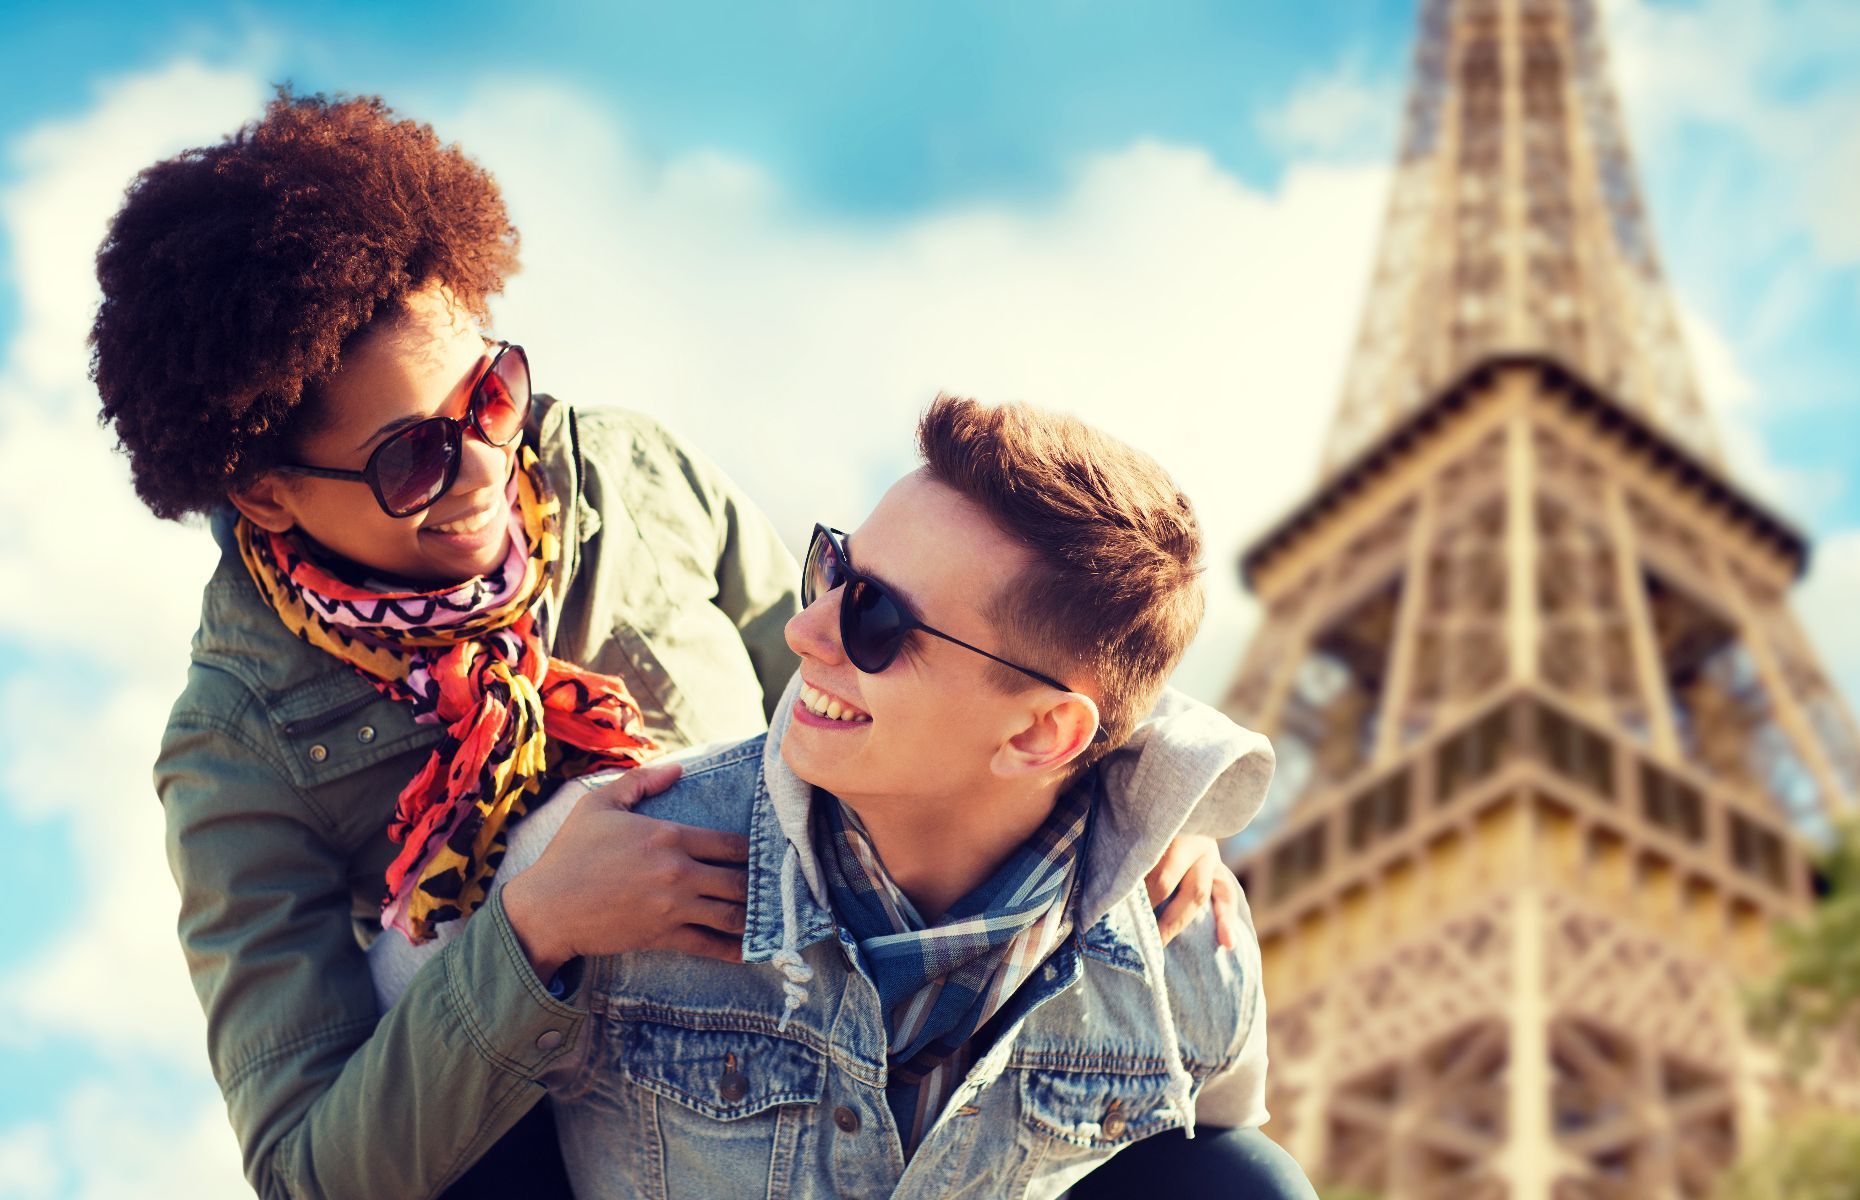 <p>Traveling is one thing, but moving abroad <a href="https://www.huffingtonpost.com/jaimee-nicole/6-rules-on-moving-abroad-for-love_b_9669550.html" rel="noreferrer noopener">permanently is a big decision</a>. If your partner wants to live in another country, and you agree solely to make them happy, you might become resentful about it. Talking about the possibility before it becomes a reality could save your relationship.</p>